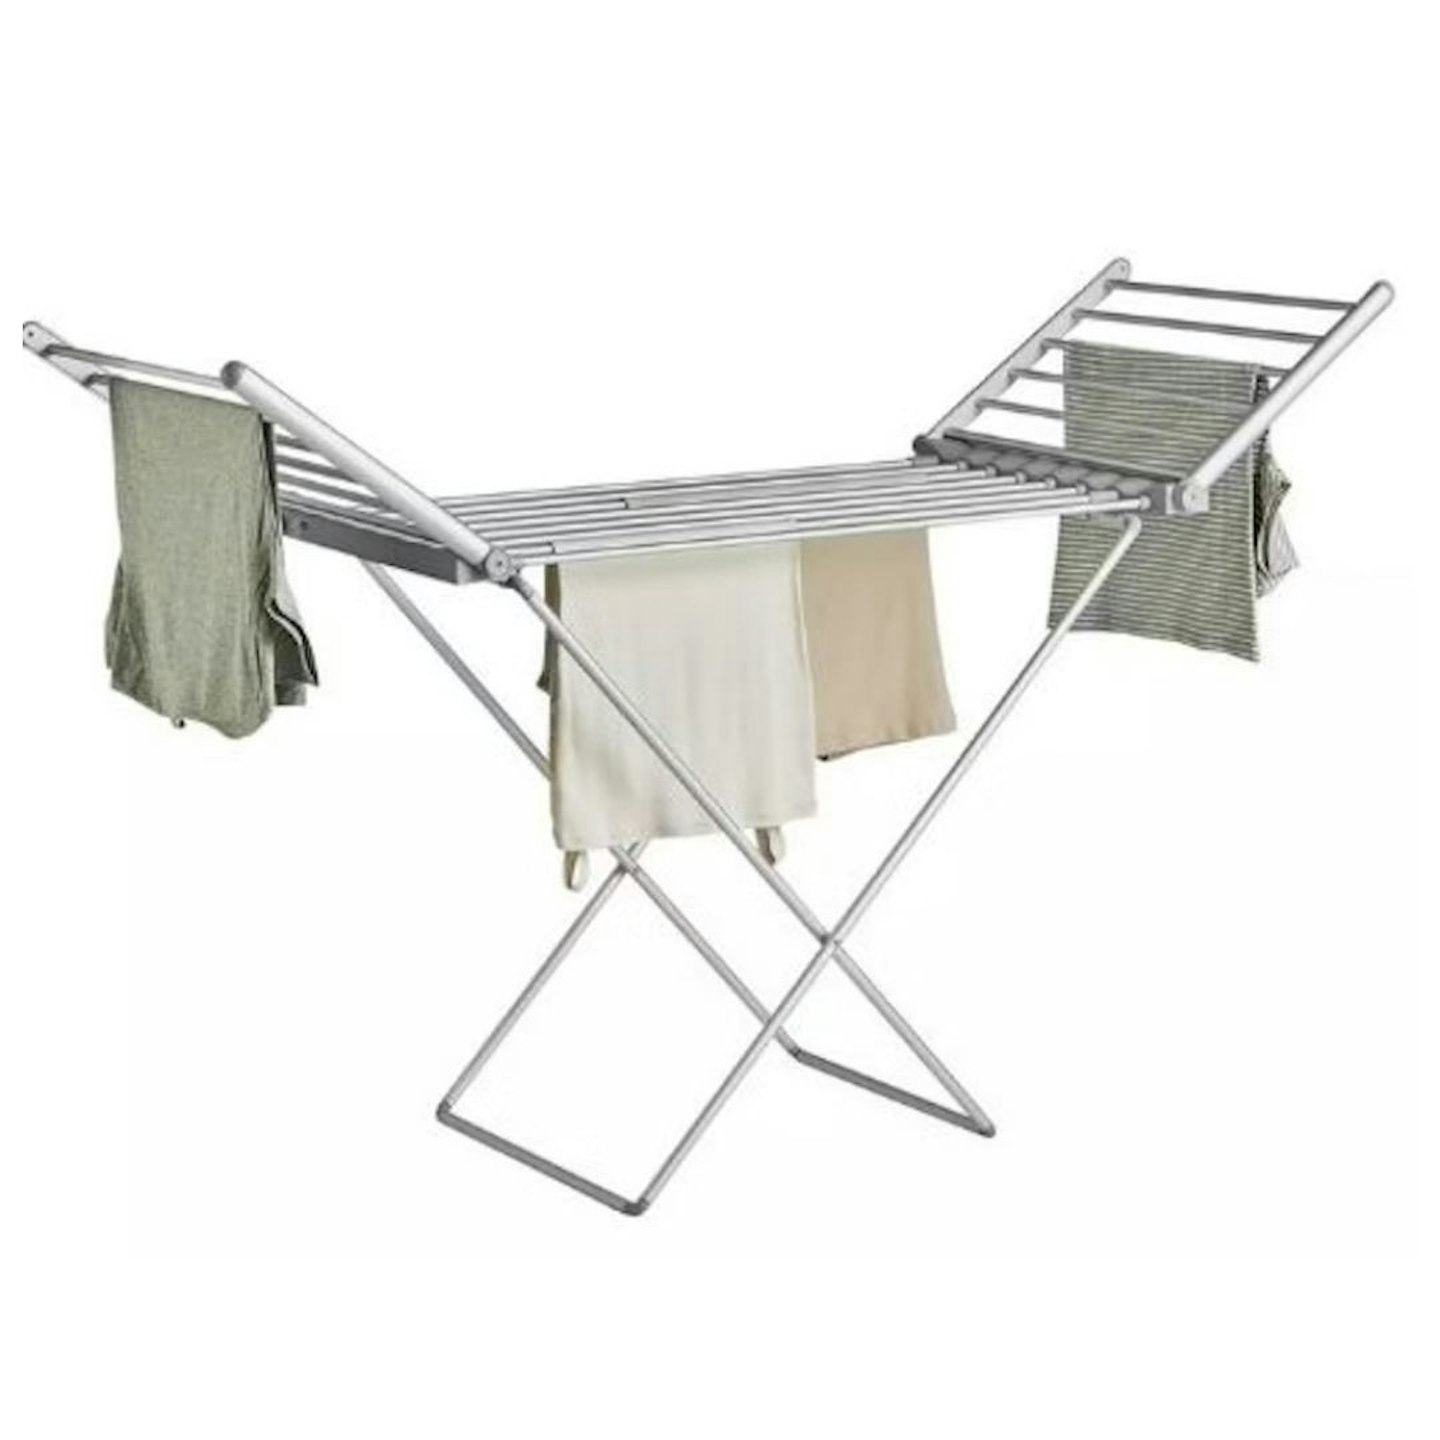 The best heated clothes airers: Argos Home 11.5m Heated Electric Indoor Clothes Airer